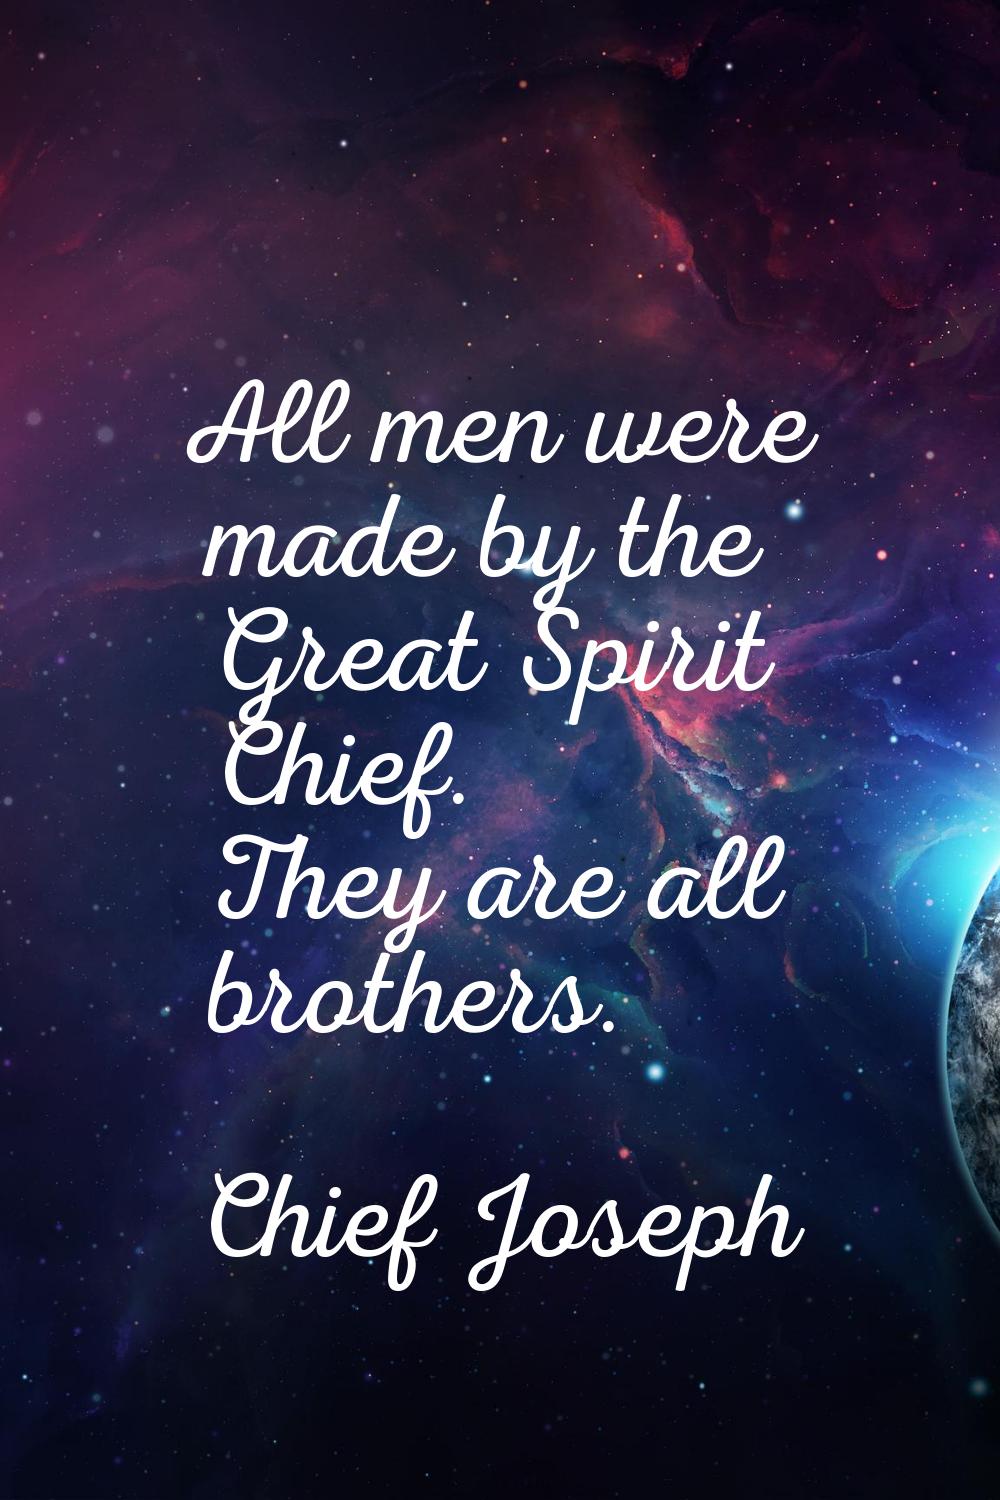 All men were made by the Great Spirit Chief. They are all brothers.